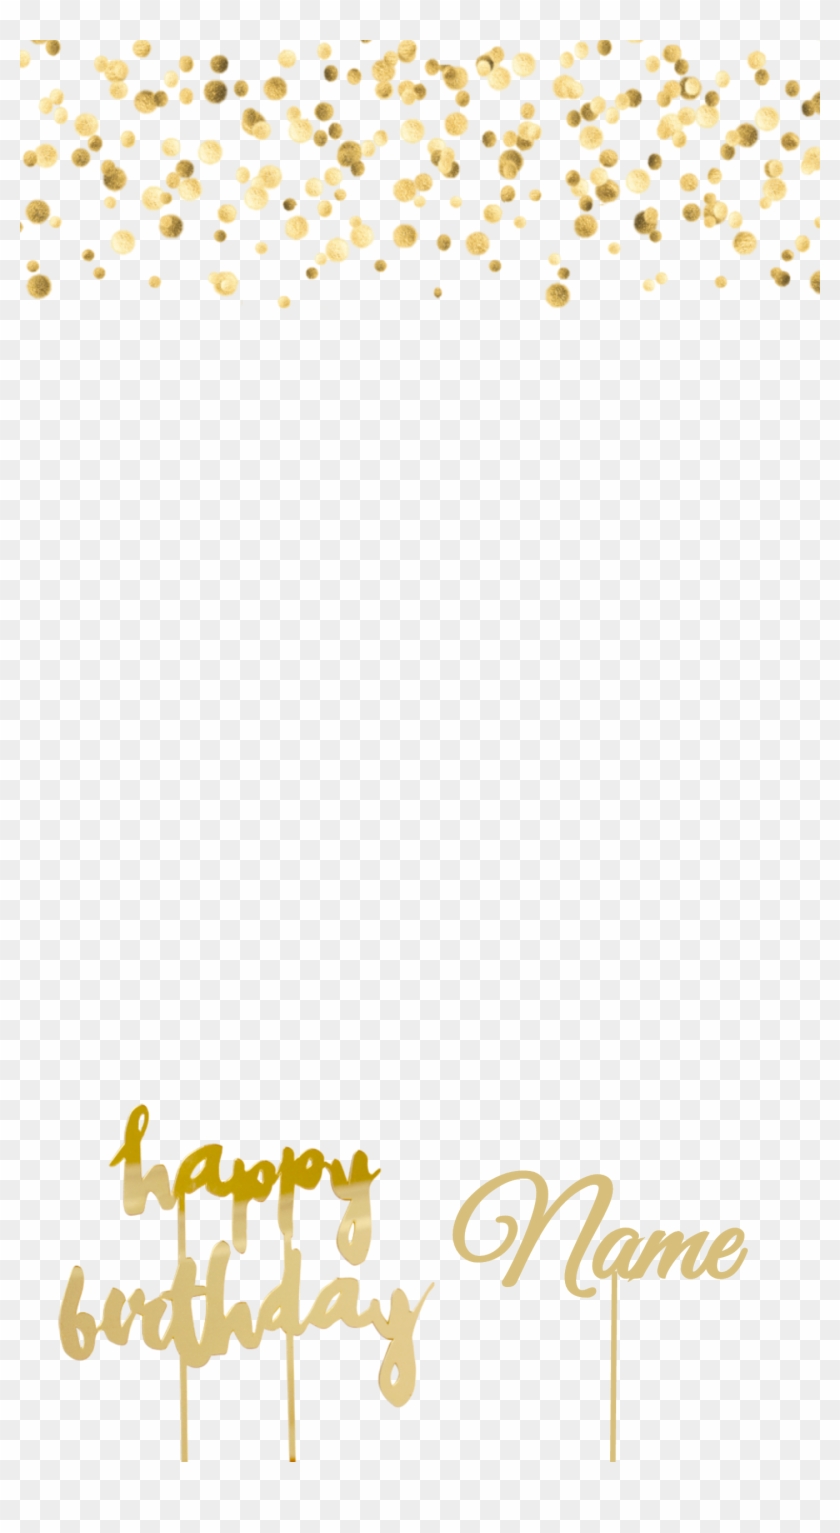 Click To Customize - Transparent Gold Confetti Background Clipart